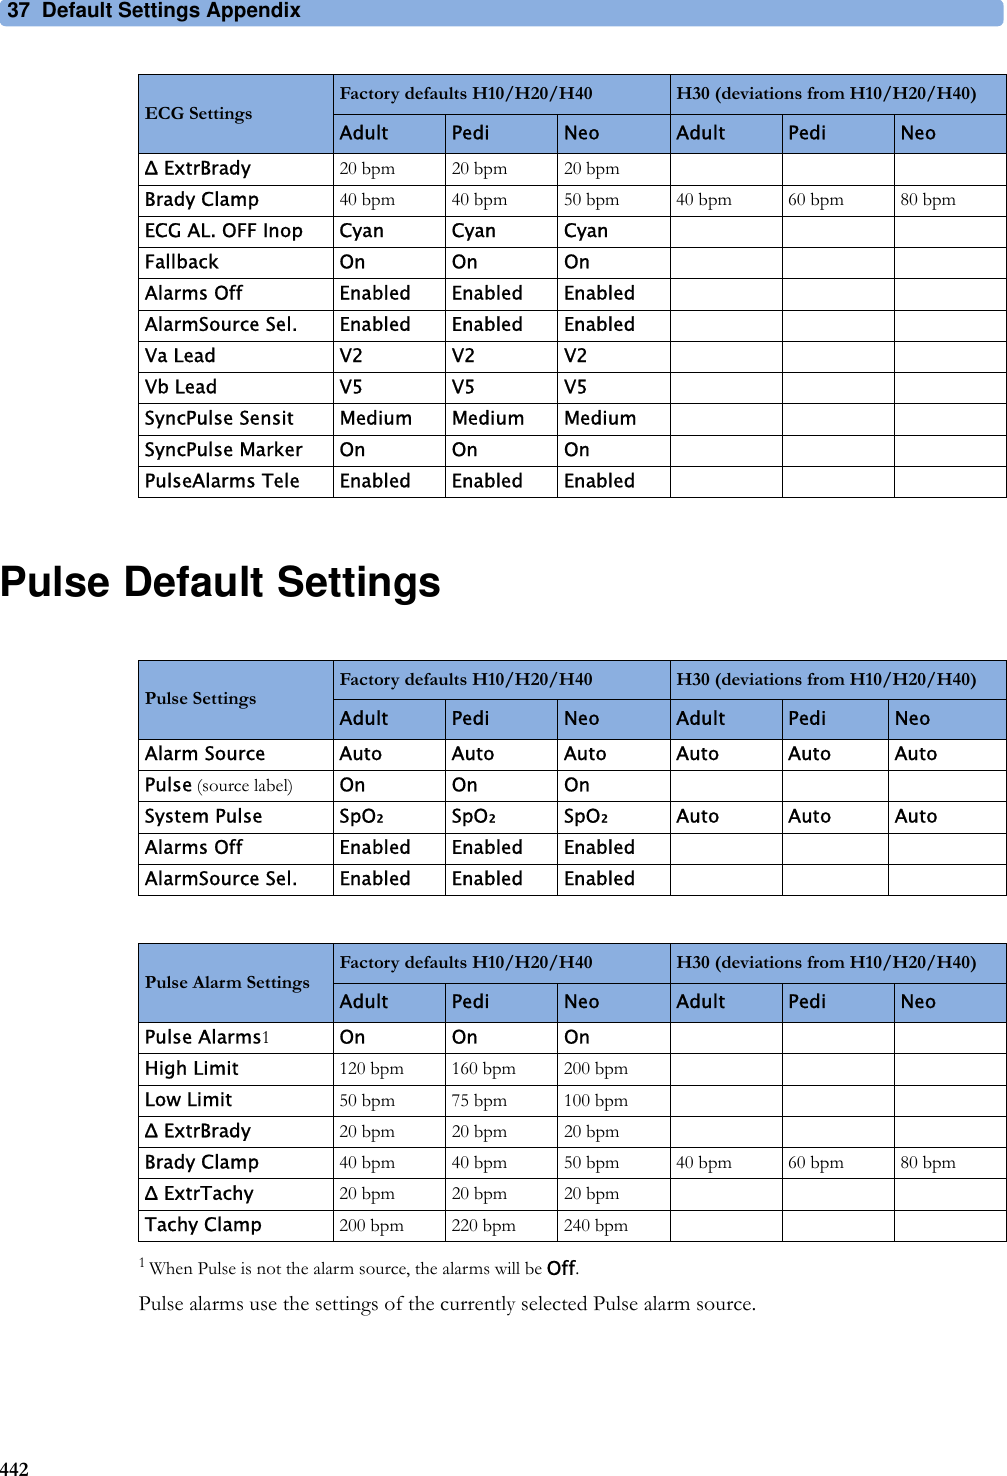 37 Default Settings Appendix442Pulse Default Settings1 When Pulse is not the alarm source, the alarms will be Off.Pulse alarms use the settings of the currently selected Pulse alarm source.Δ ExtrBrady 20 bpm 20 bpm 20 bpmBrady Clamp 40 bpm 40 bpm 50 bpm 40 bpm 60 bpm 80 bpmECG AL. OFF Inop Cyan Cyan CyanFallback OnOnOnAlarms Off Enabled Enabled EnabledAlarmSource Sel. Enabled Enabled EnabledVa Lead V2 V2 V2Vb Lead V5 V5 V5SyncPulse Sensit Medium Medium MediumSyncPulse Marker On On OnPulseAlarms Tele Enabled Enabled EnabledECG SettingsFactory defaults H10/H20/H40 H30 (deviations from H10/H20/H40)Adult Pedi Neo Adult Pedi NeoPulse SettingsFactory defaults H10/H20/H40 H30 (deviations from H10/H20/H40)Adult Pedi Neo Adult Pedi NeoAlarm Source Auto Auto Auto Auto Auto AutoPulse (source label) On On OnSystem Pulse SpO₂SpO₂SpO₂Auto Auto AutoAlarms Off Enabled Enabled EnabledAlarmSource Sel. Enabled Enabled EnabledPulse Alarm SettingsFactory defaults H10/H20/H40 H30 (deviations from H10/H20/H40)Adult Pedi Neo Adult Pedi NeoPulse Alarms1On On OnHigh Limit 120 bpm 160 bpm 200 bpmLow Limit 50 bpm 75 bpm 100 bpmΔ ExtrBrady 20 bpm 20 bpm 20 bpmBrady Clamp 40 bpm 40 bpm 50 bpm 40 bpm 60 bpm 80 bpmΔ ExtrTachy 20 bpm 20 bpm 20 bpmTachy Clamp 200 bpm 220 bpm 240 bpm